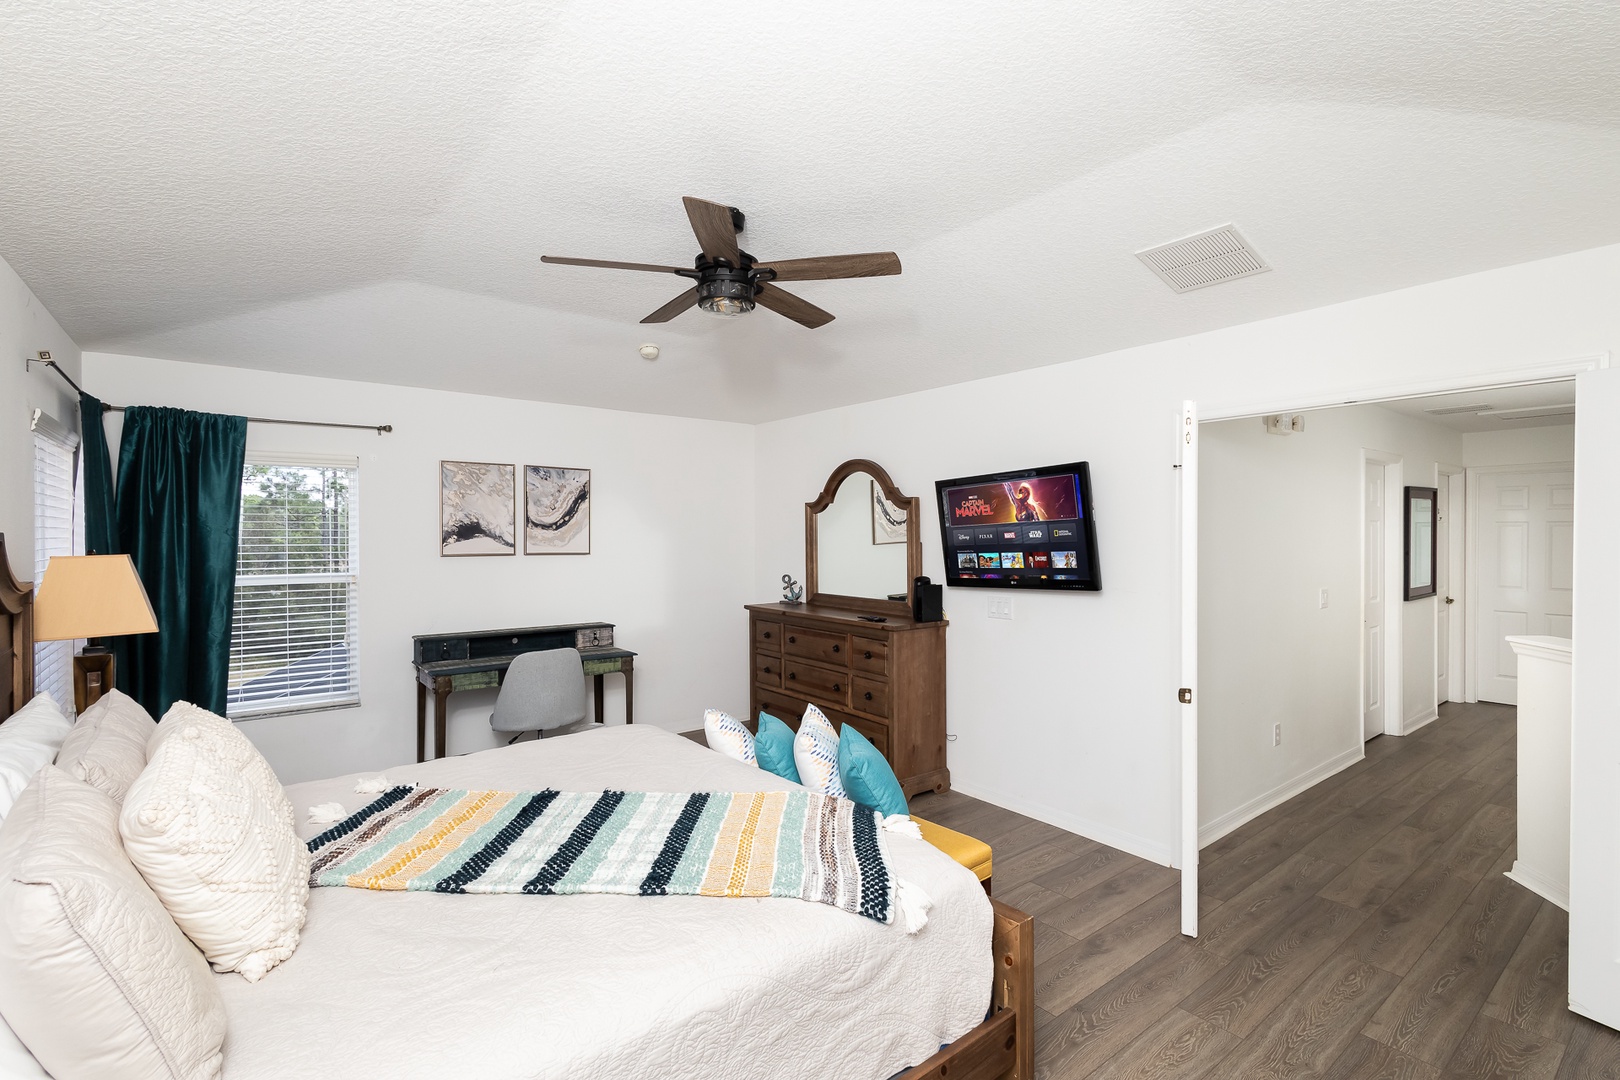 The 2nd-floor king suite offers a private ensuite with walk-in closet & Smart TV